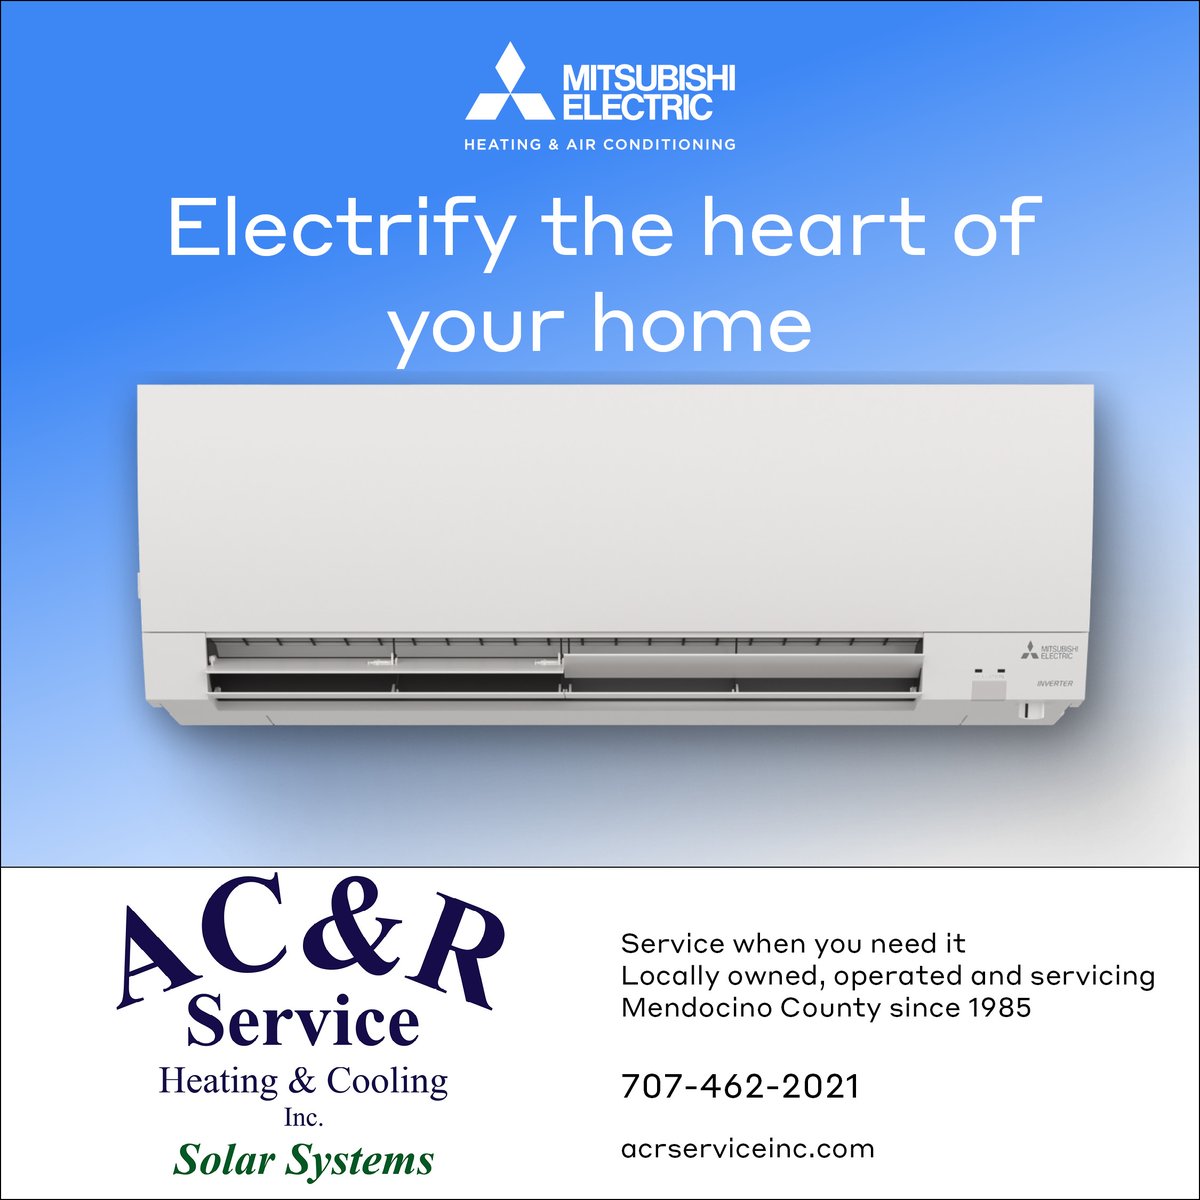 Make the switch to electric for an efficient and eco-friendly home. ⚡⚡⚡
💚GO GREEN TODAY!!!!!💚

#acrserviceukiah
#SUMMER
#ukiah
#HVAC
#mitsubishi
#heatingandcooling
#gogreen
#goelectric
#northernelectric
#mitsubishielectric
#northerncalifornia
#SaveThePlanet